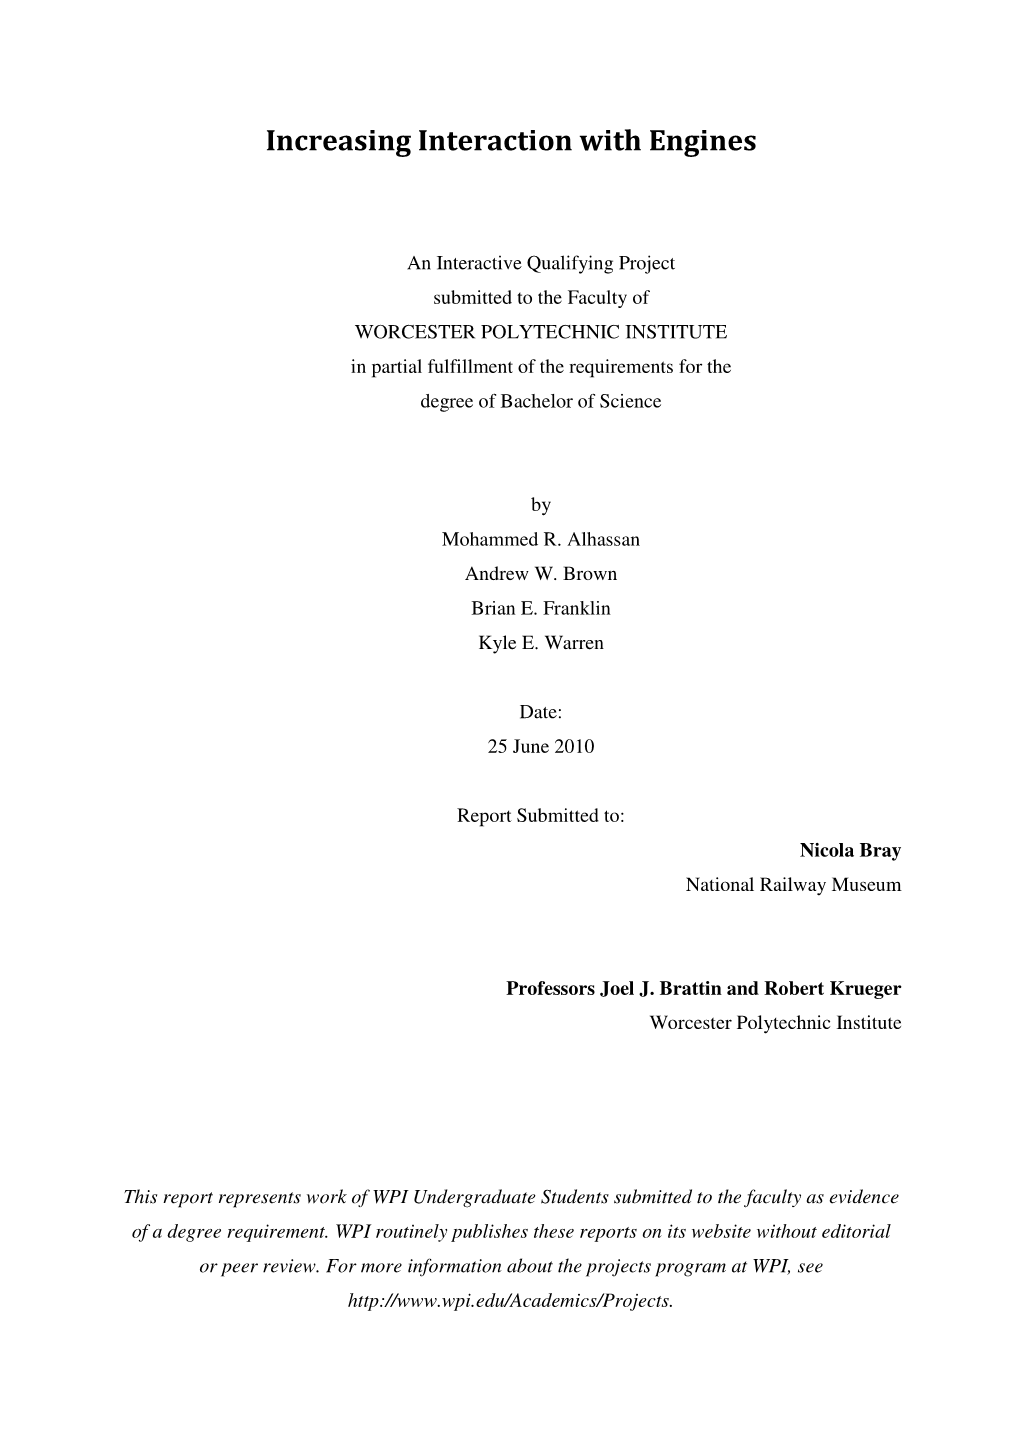 This Report Represents Work of WPI Undergraduate Students Submitted to the Faculty As Evidence of a Degree Requirement